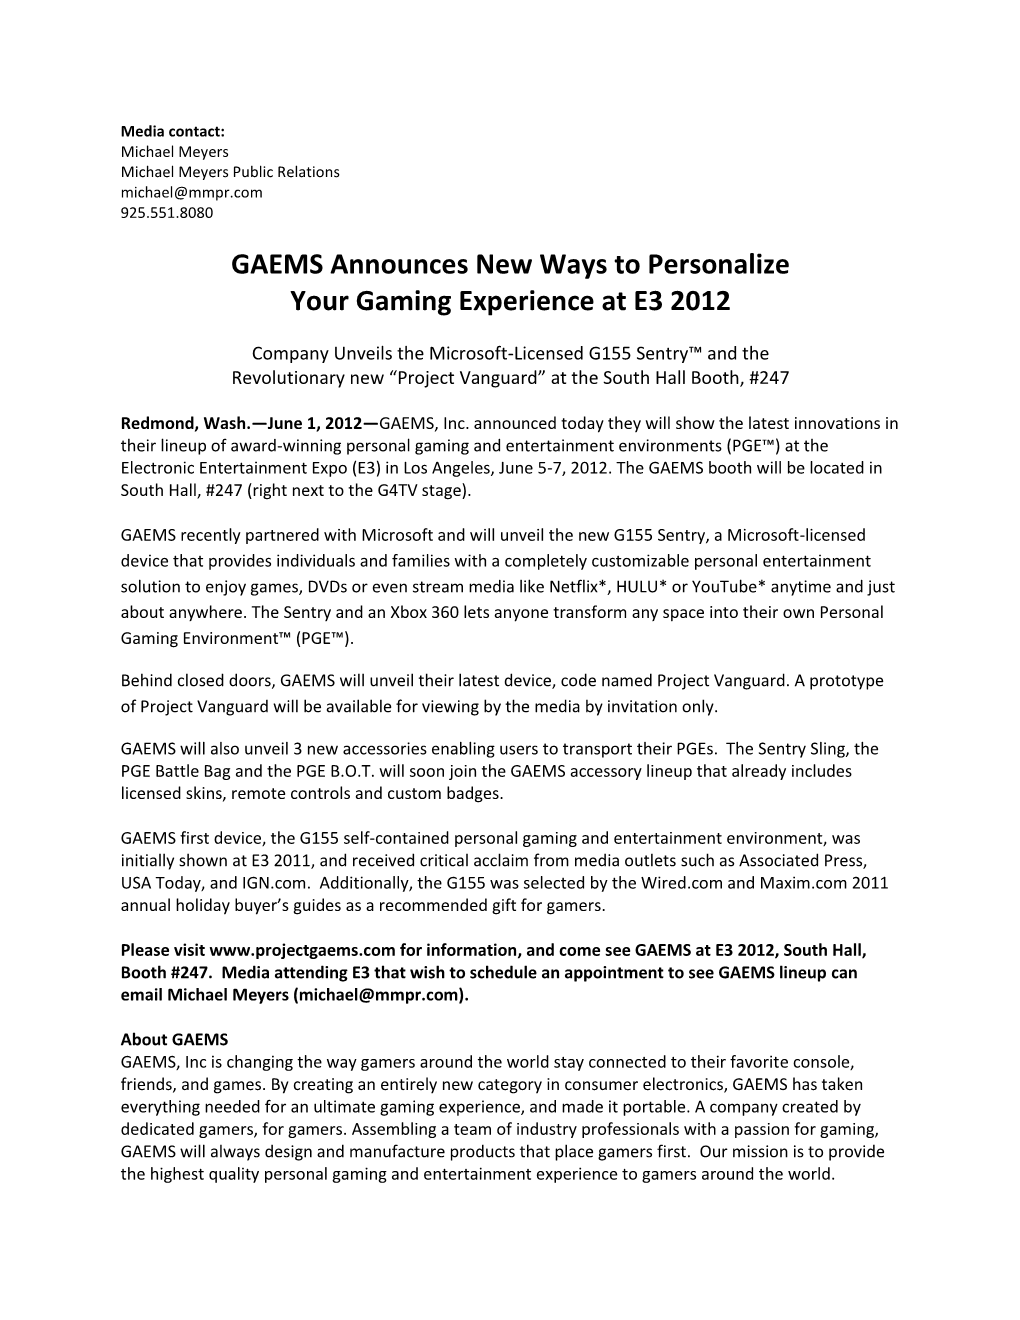 GAEMS Announces New Ways to Personalize Your Gaming Experience at E3 2012